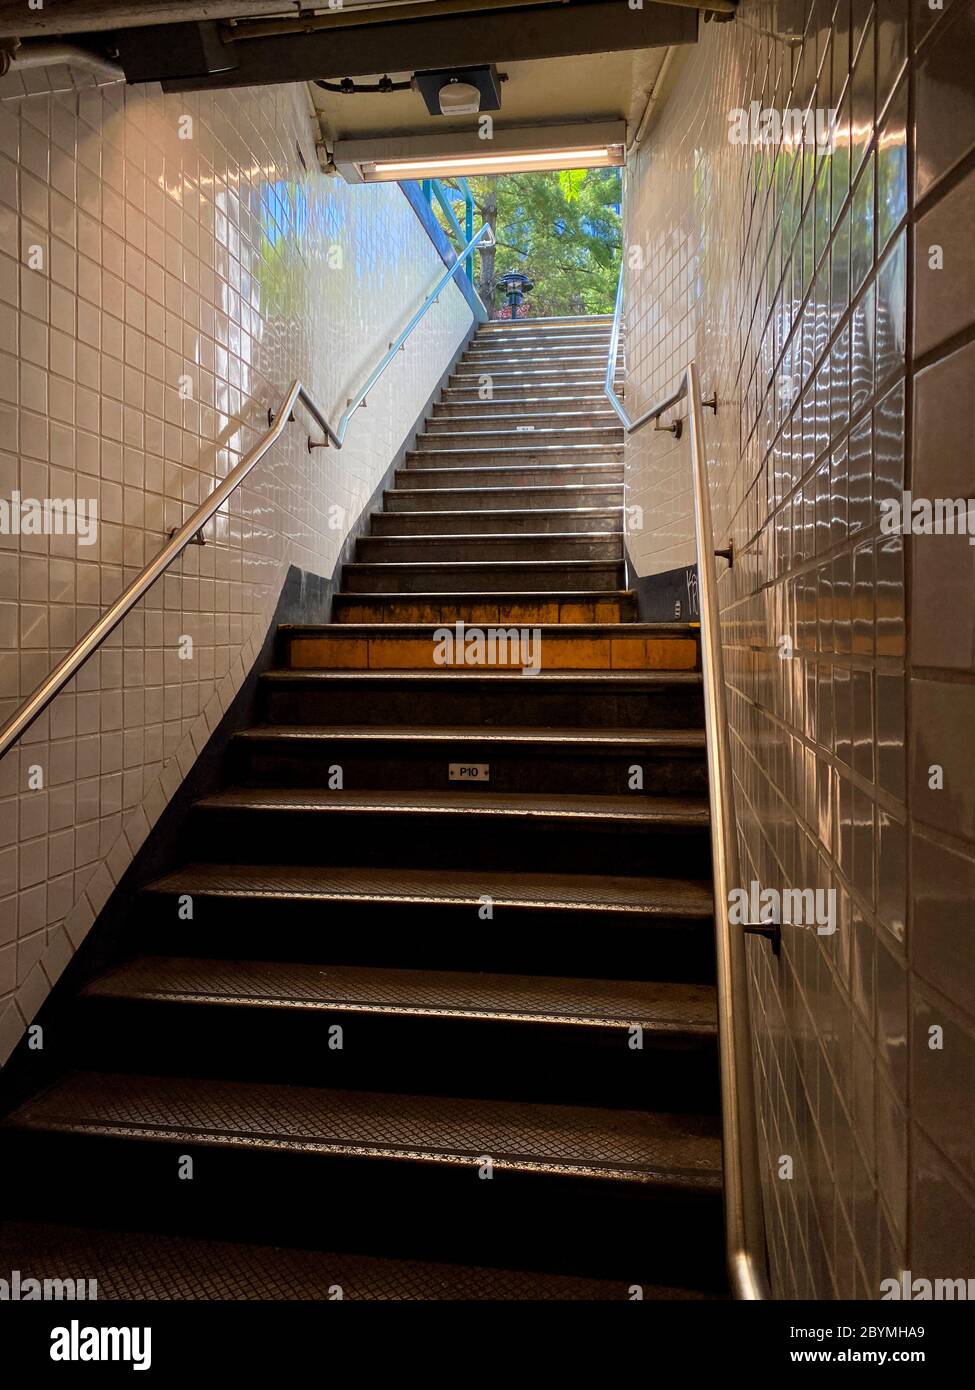 Staircase exit from a subway station in Brooklyn, New York. Stock Photo